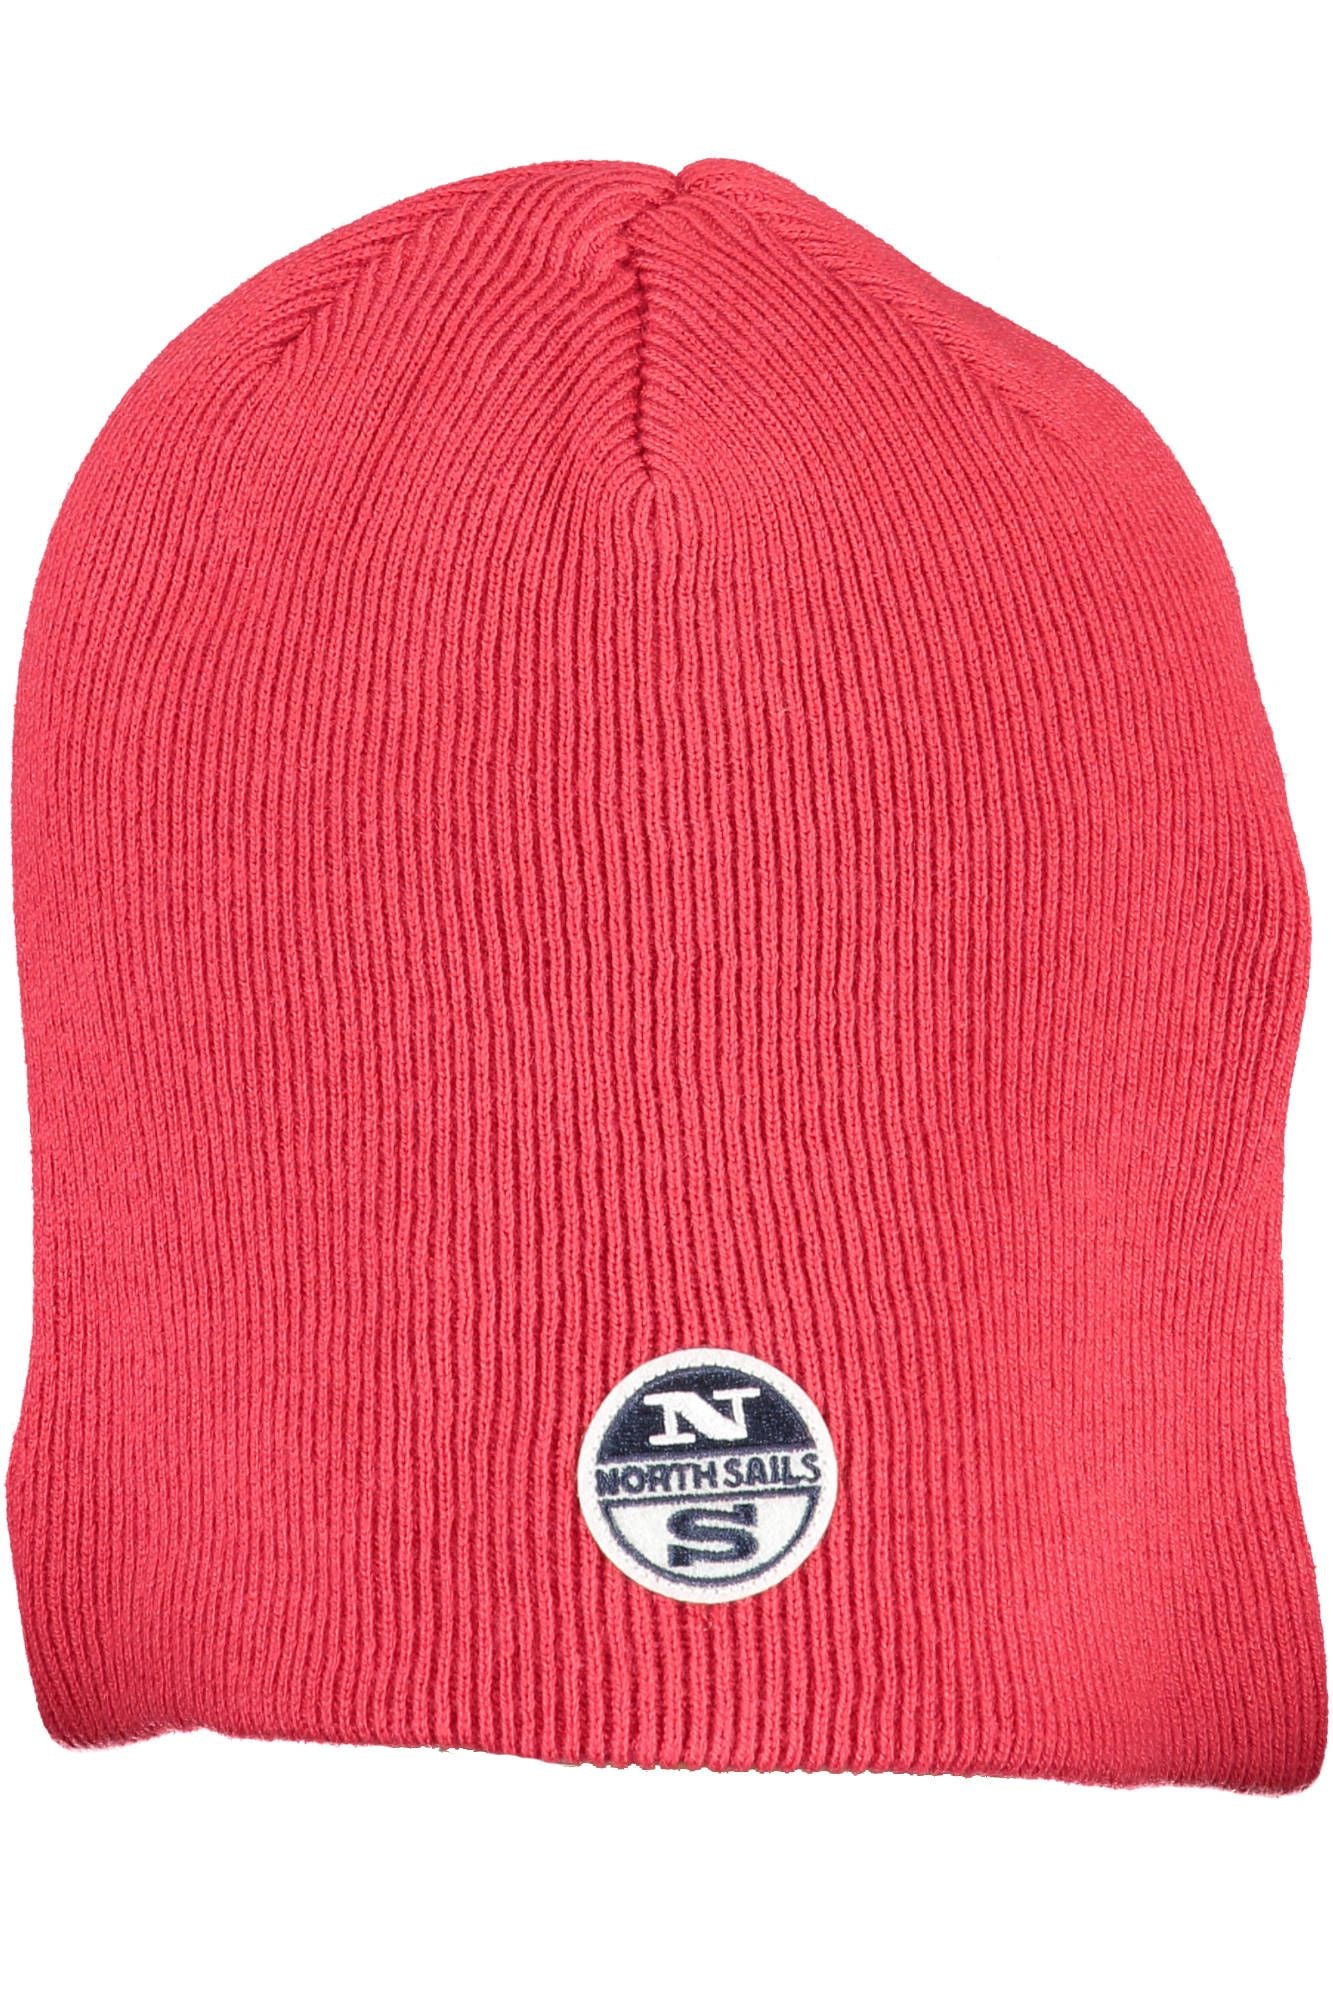 North Sails Chic Red Cotton Cap with Iconic Logo